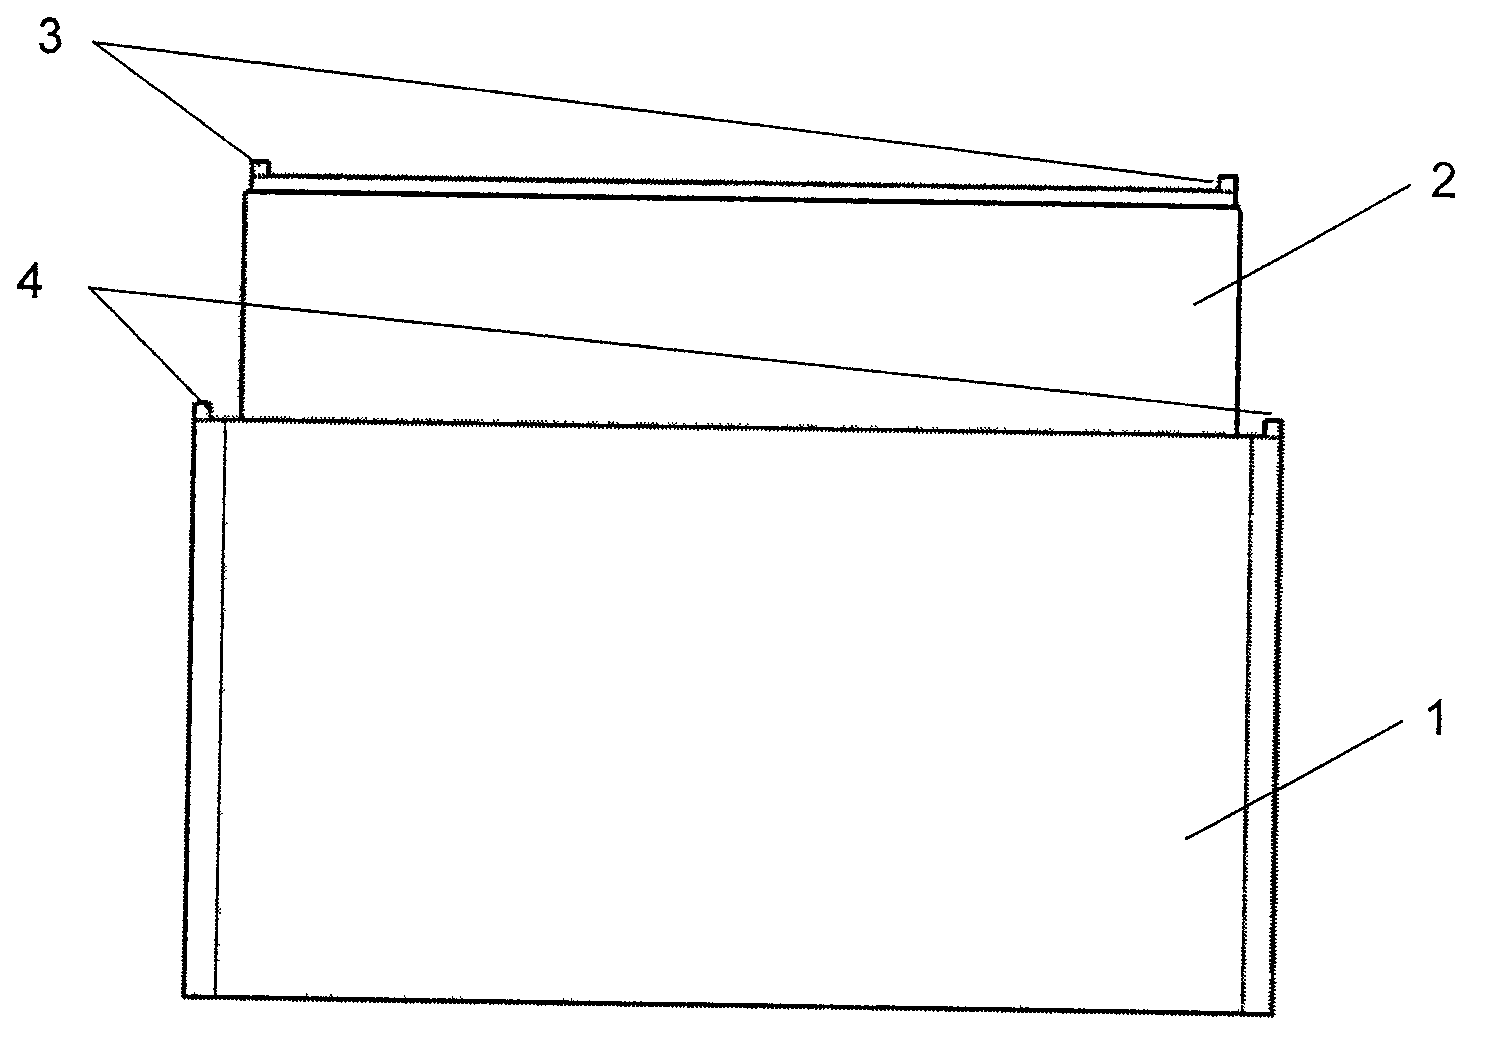 Nested type top overflowing gate